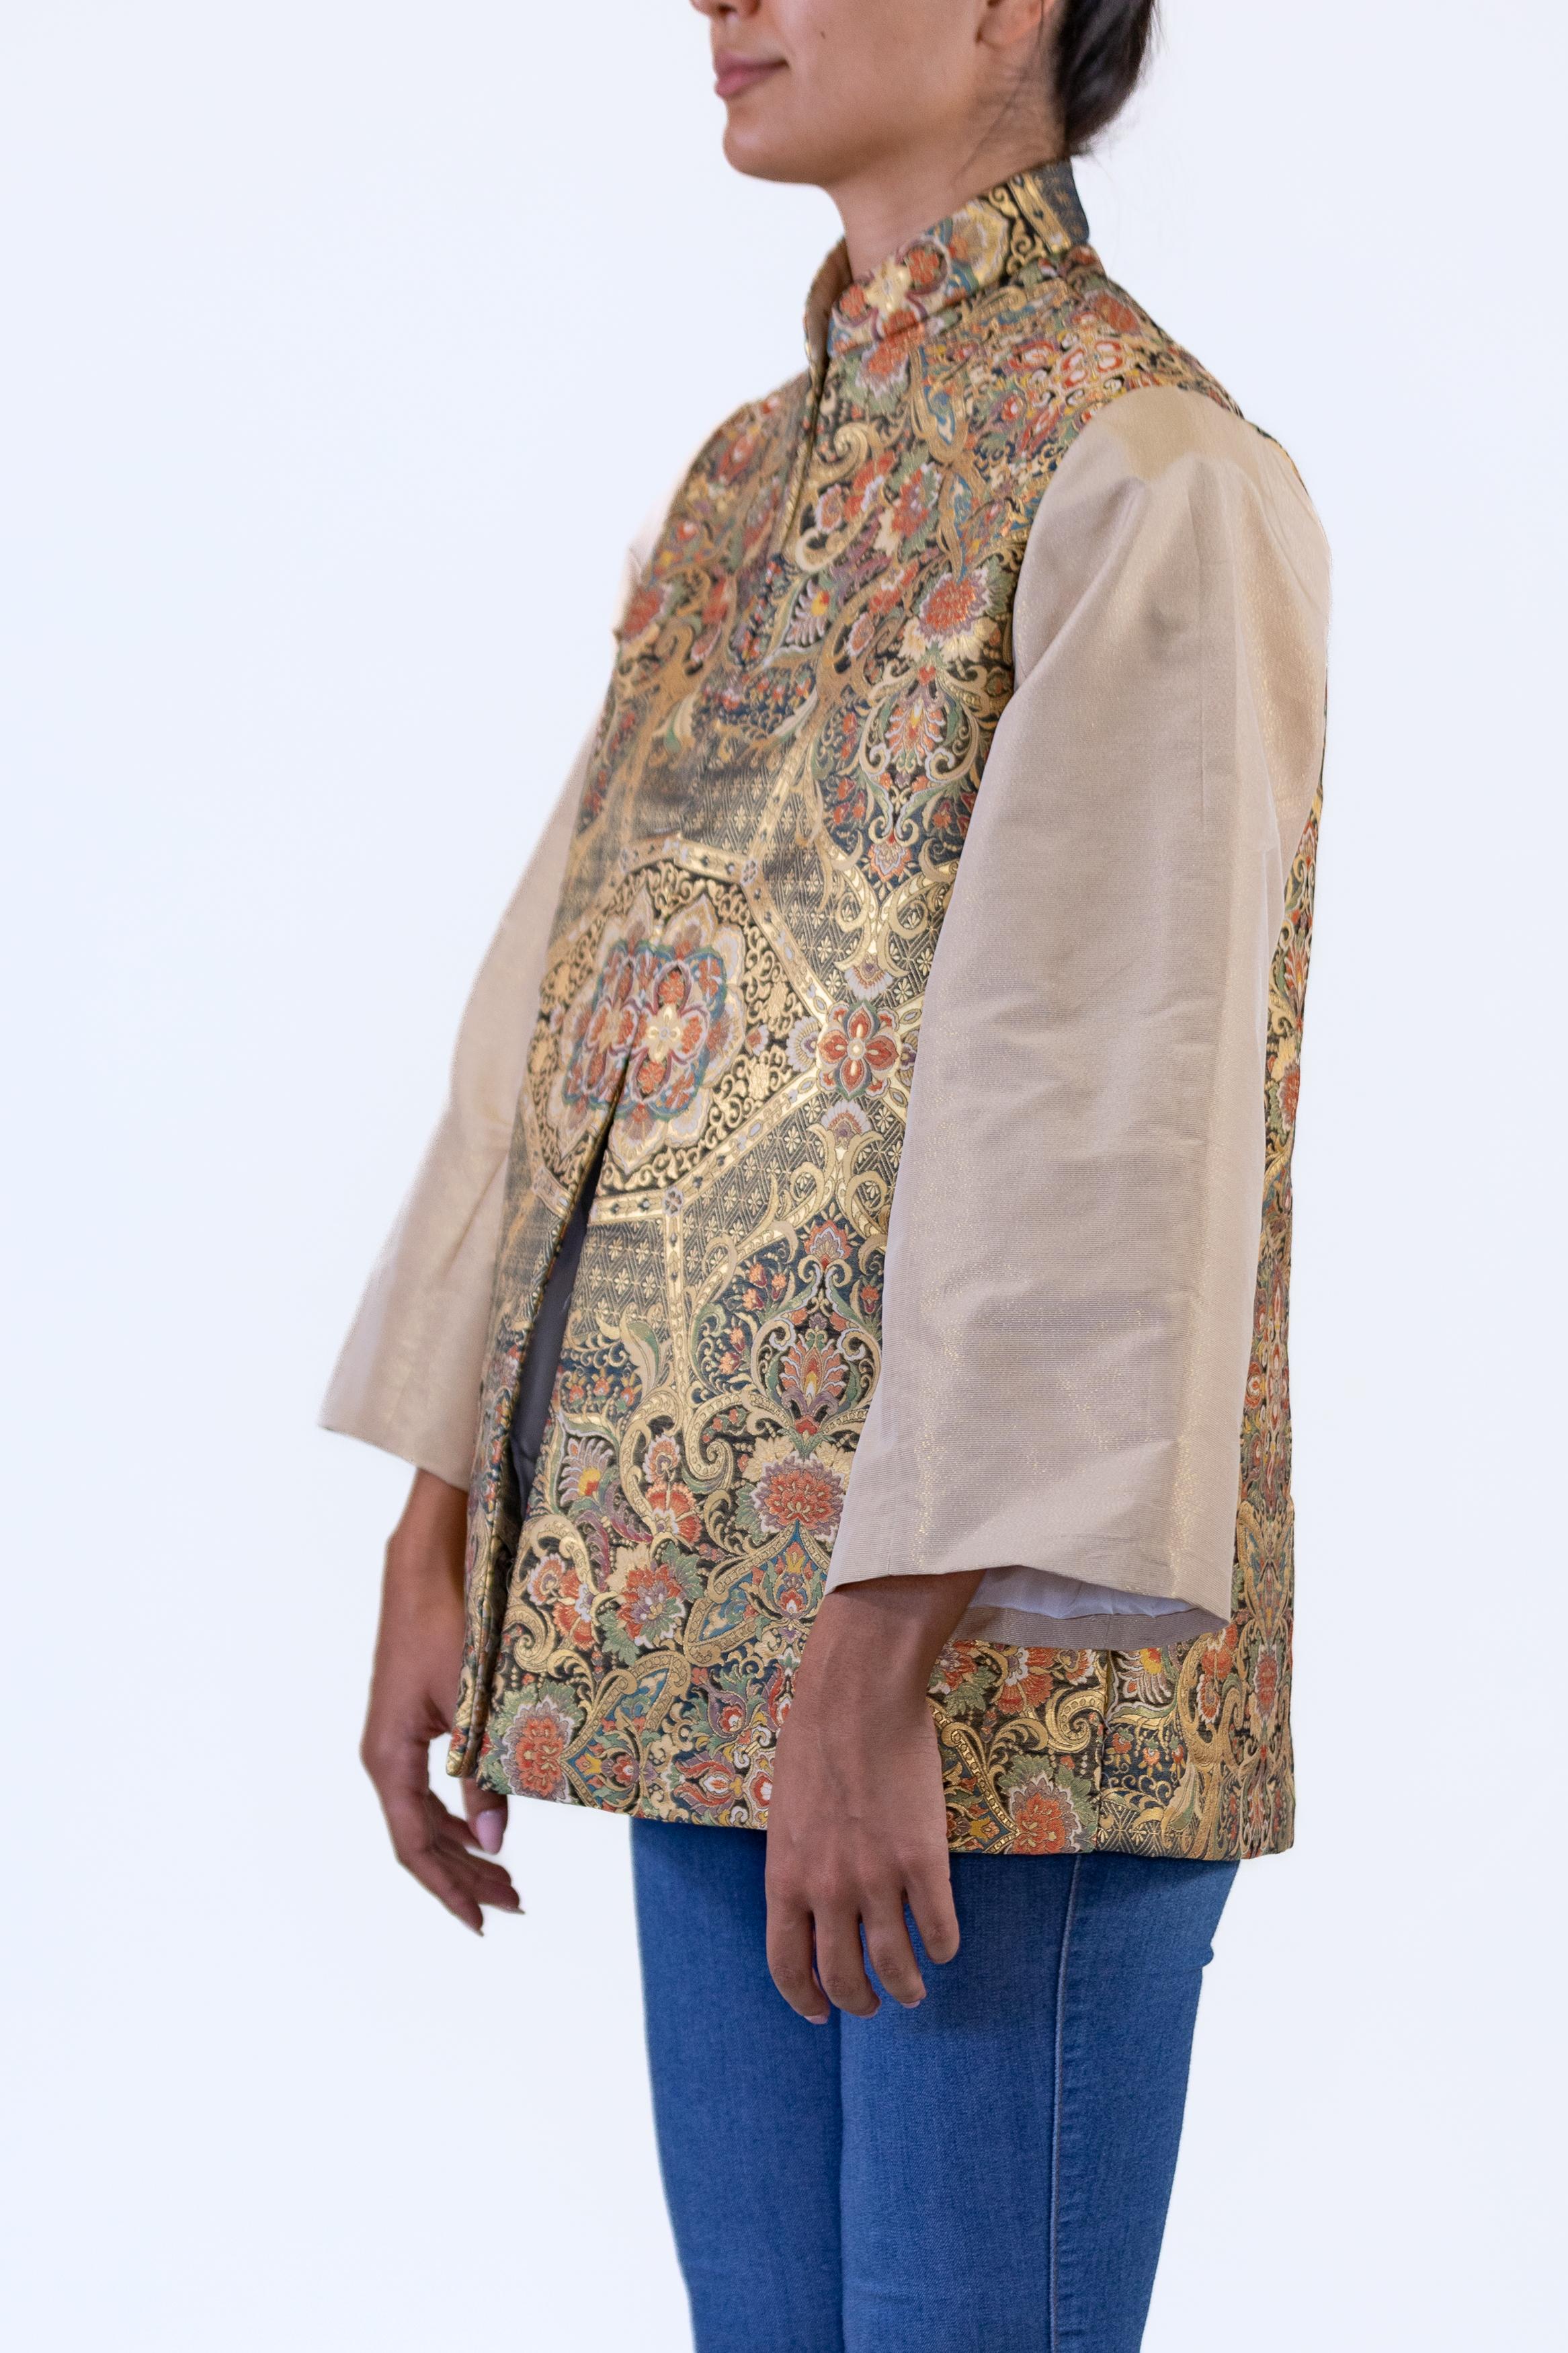 Morphew Collection Gold Metallic Silk Japanese Obi Brocade Jacket
MORPHEW COLLECTION is made entirely by hand in our NYC Ateliér of rare antique materials sourced from around the globe. Our sustainable vintage materials represent over a century of